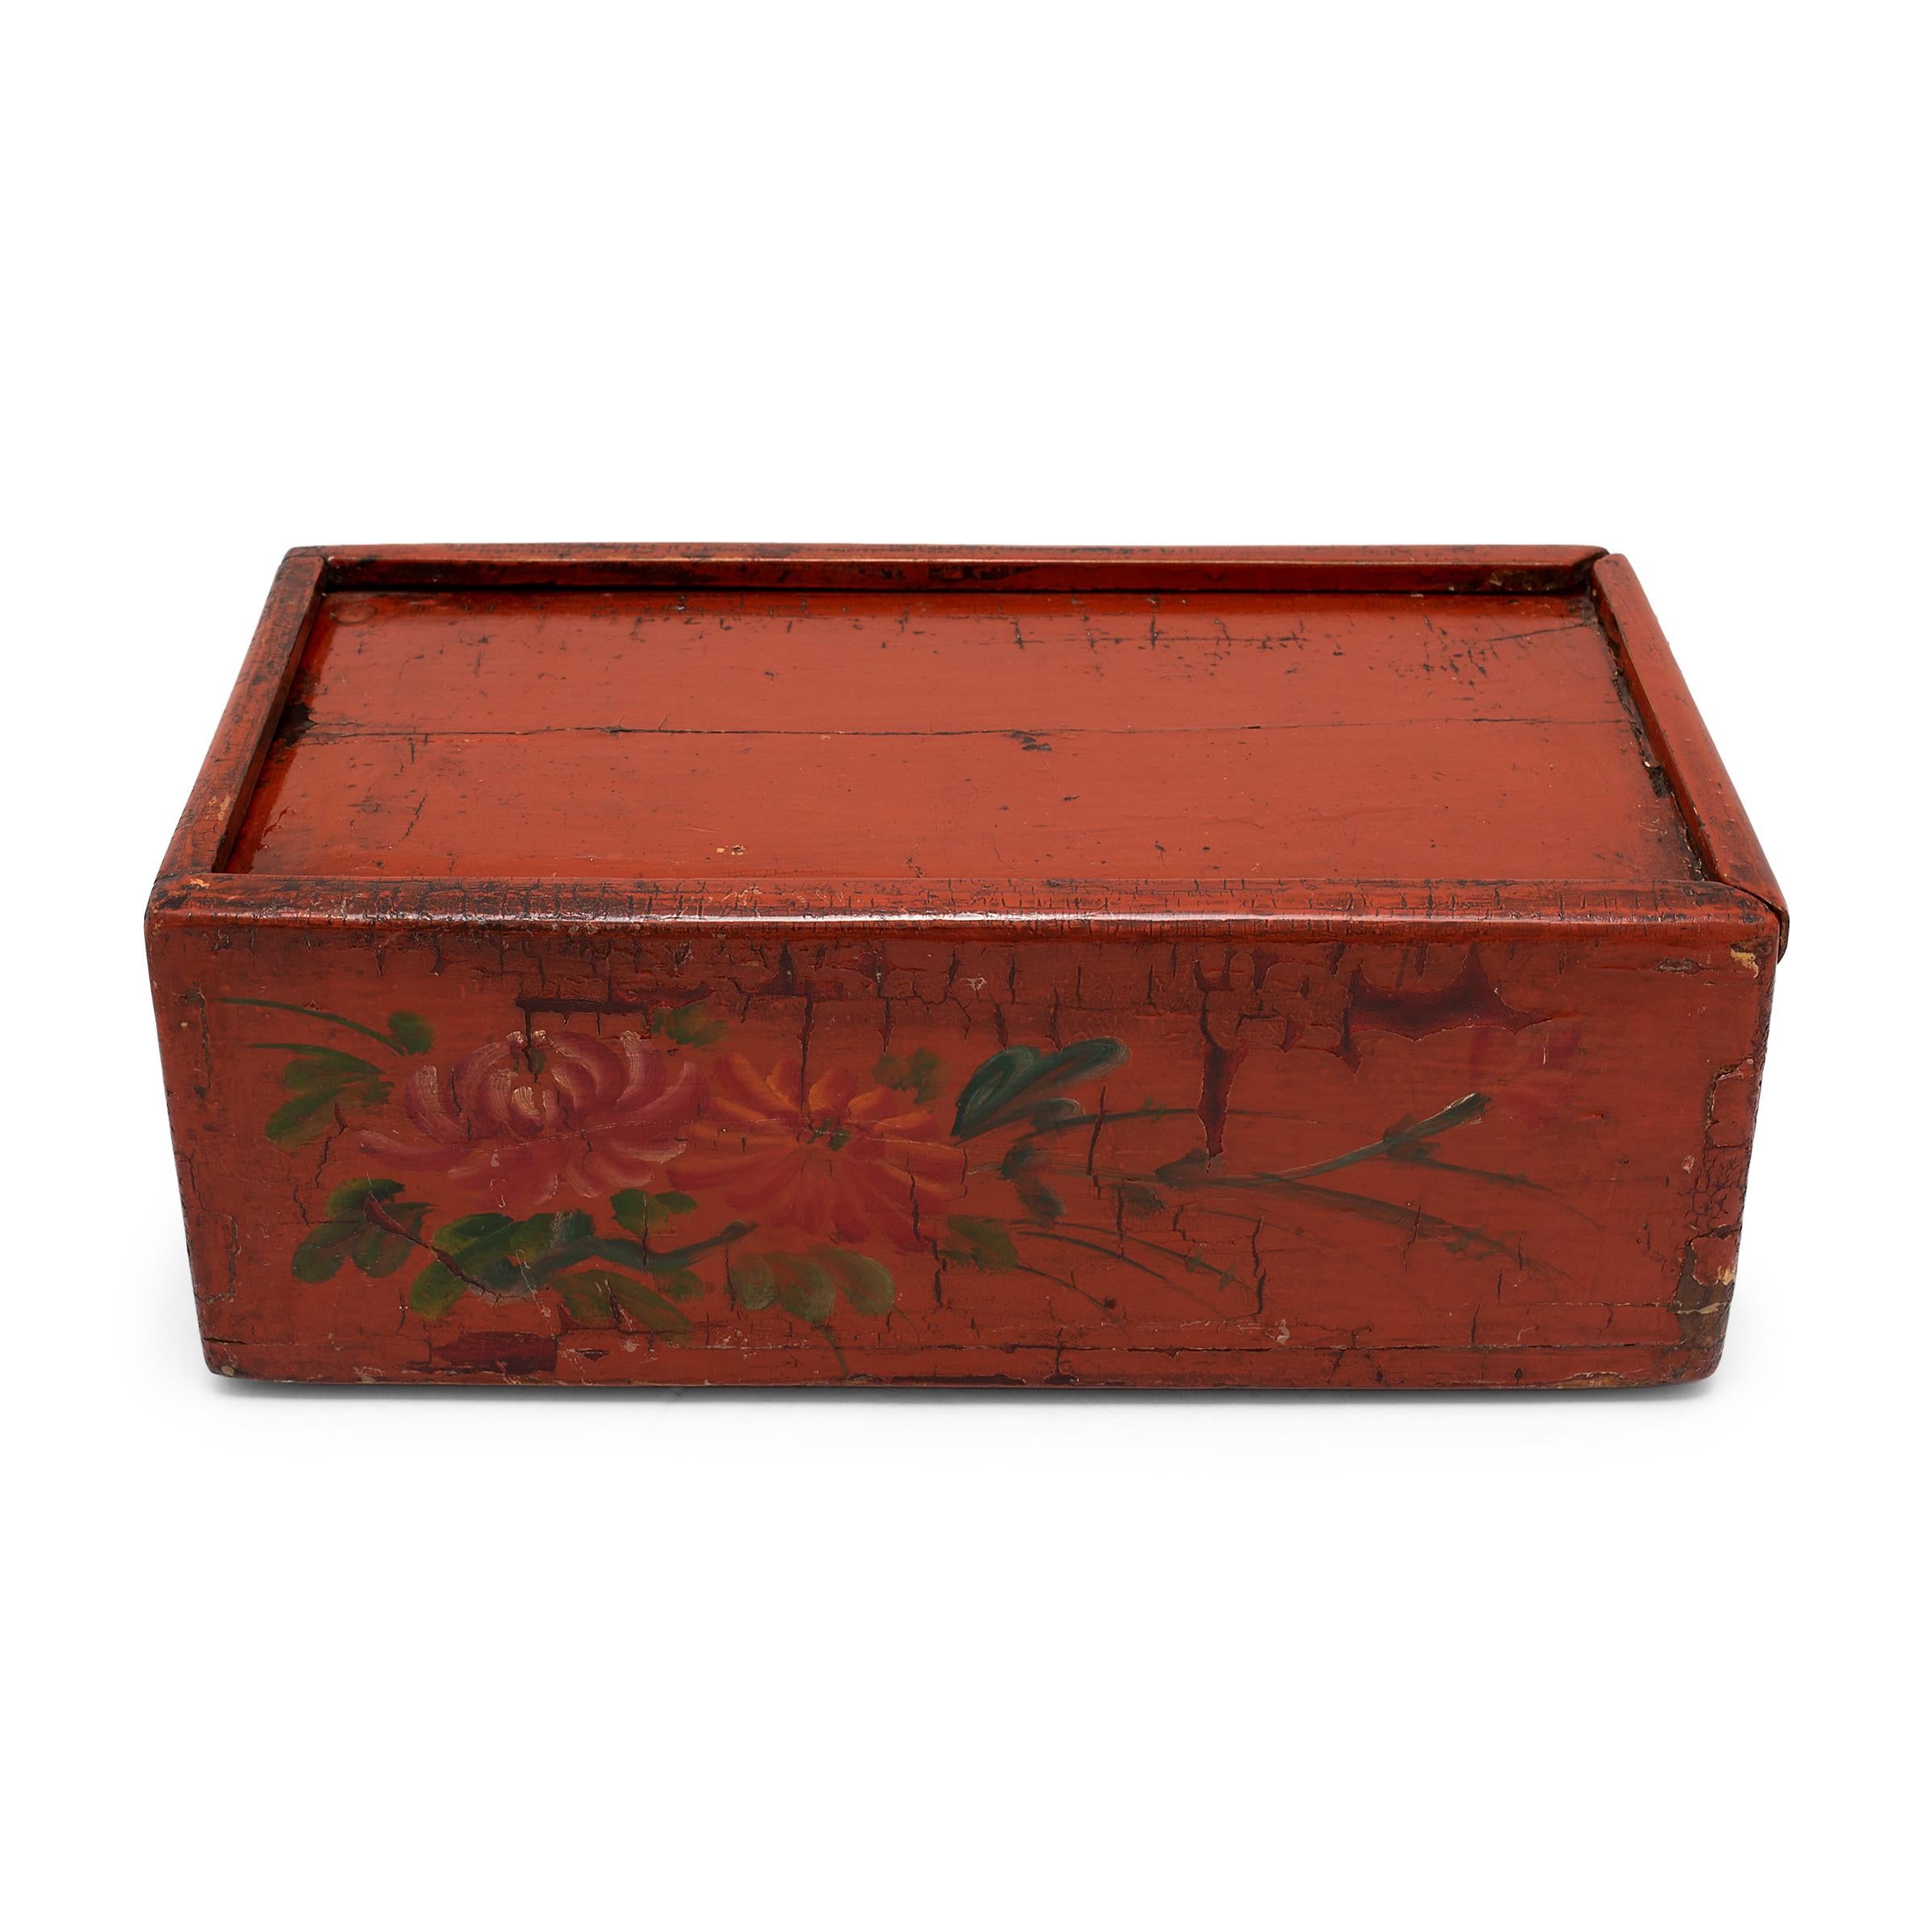 This painted wooden box dates to the mid-19th century and was likely used as a document chest in a Qing-dynasty office or scholars' studio. Crafted with a sliding lid, the box was used to store and protect painted scrolls and official documents. The